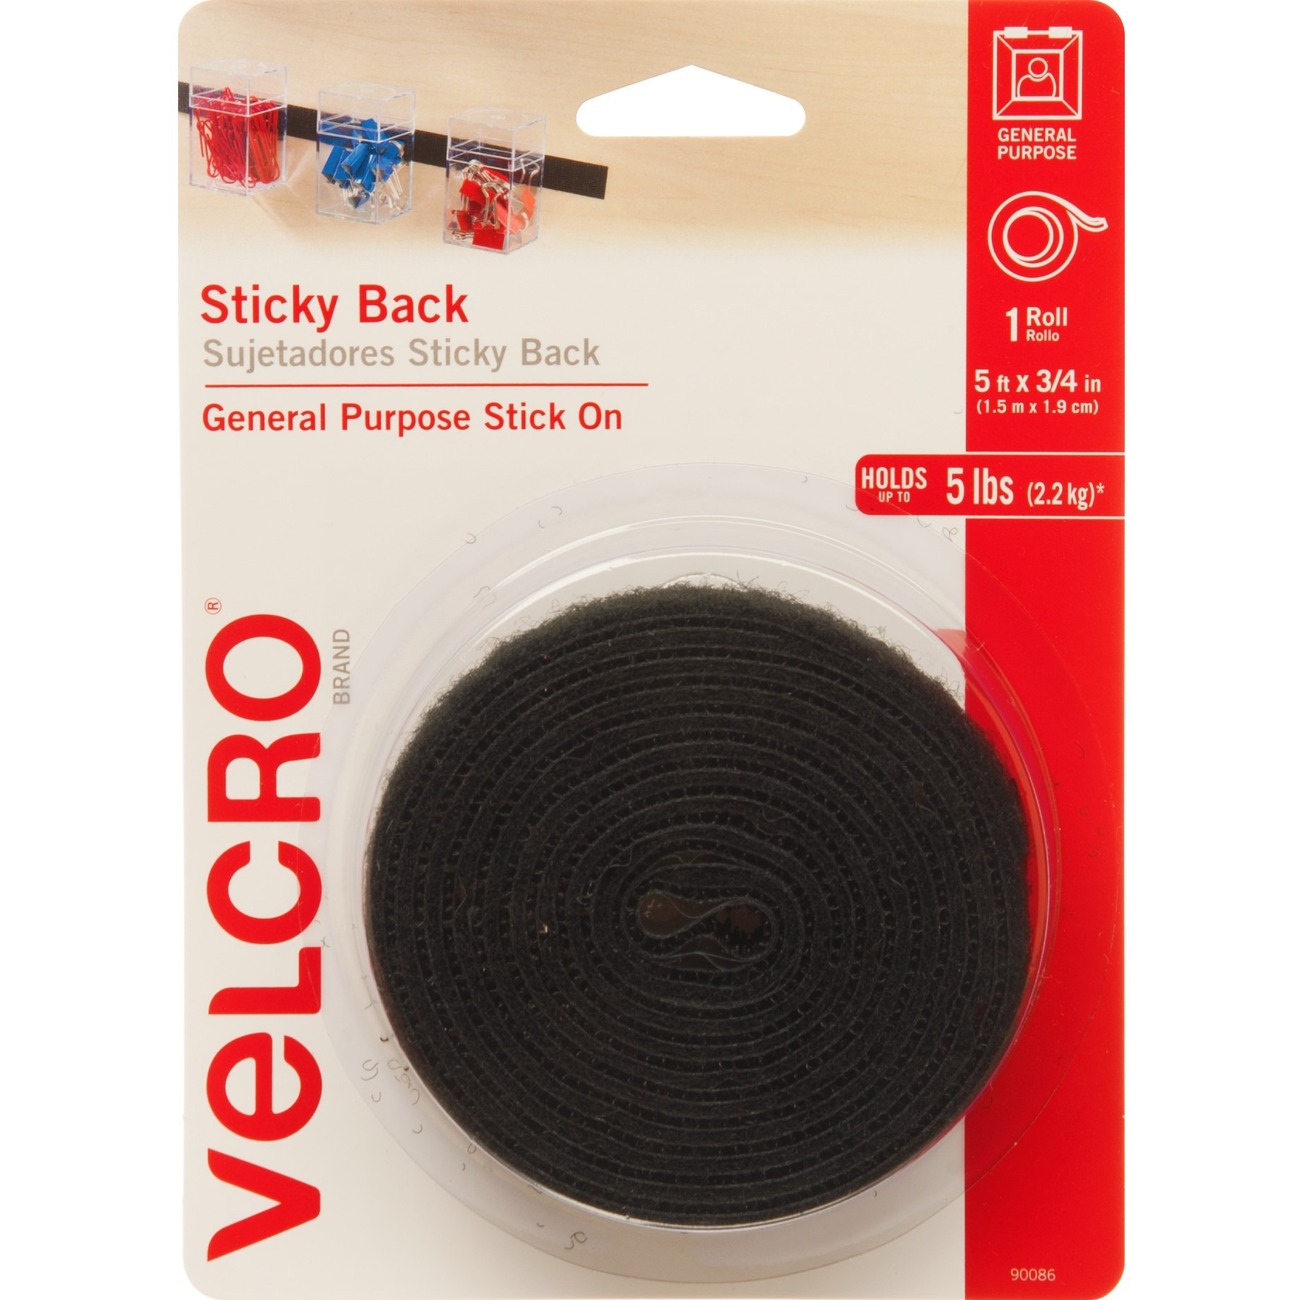 VELCRO Brand Mounting Squares | Pack of 32 | 7/8 Inch White | Adhesive  Sticky Back Hook and Loop Fasteners for Home, Office or Crafting | Strong